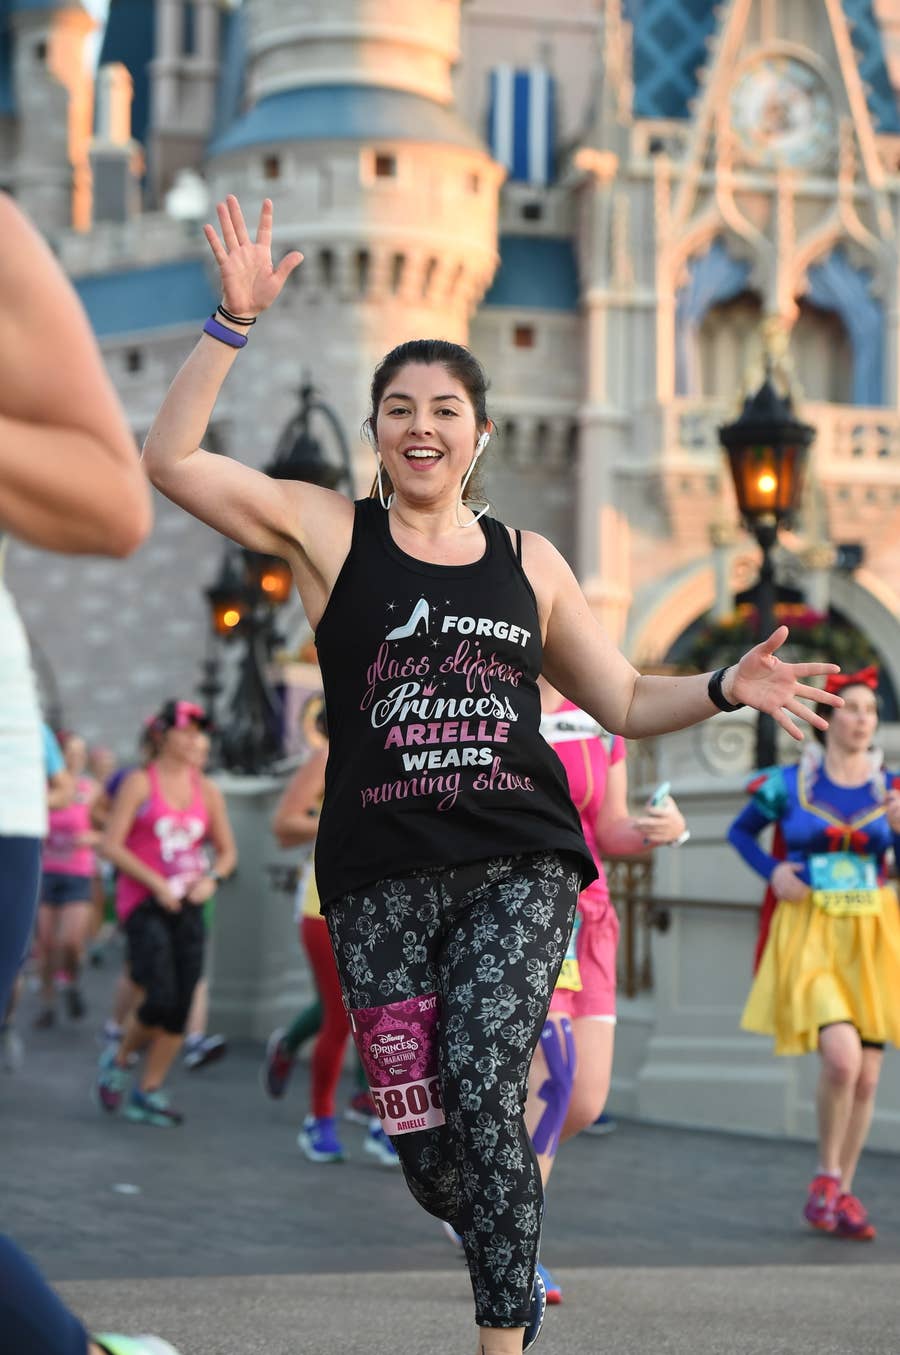 27 Things I Learned From Running the Disney Princess Half-Marathon